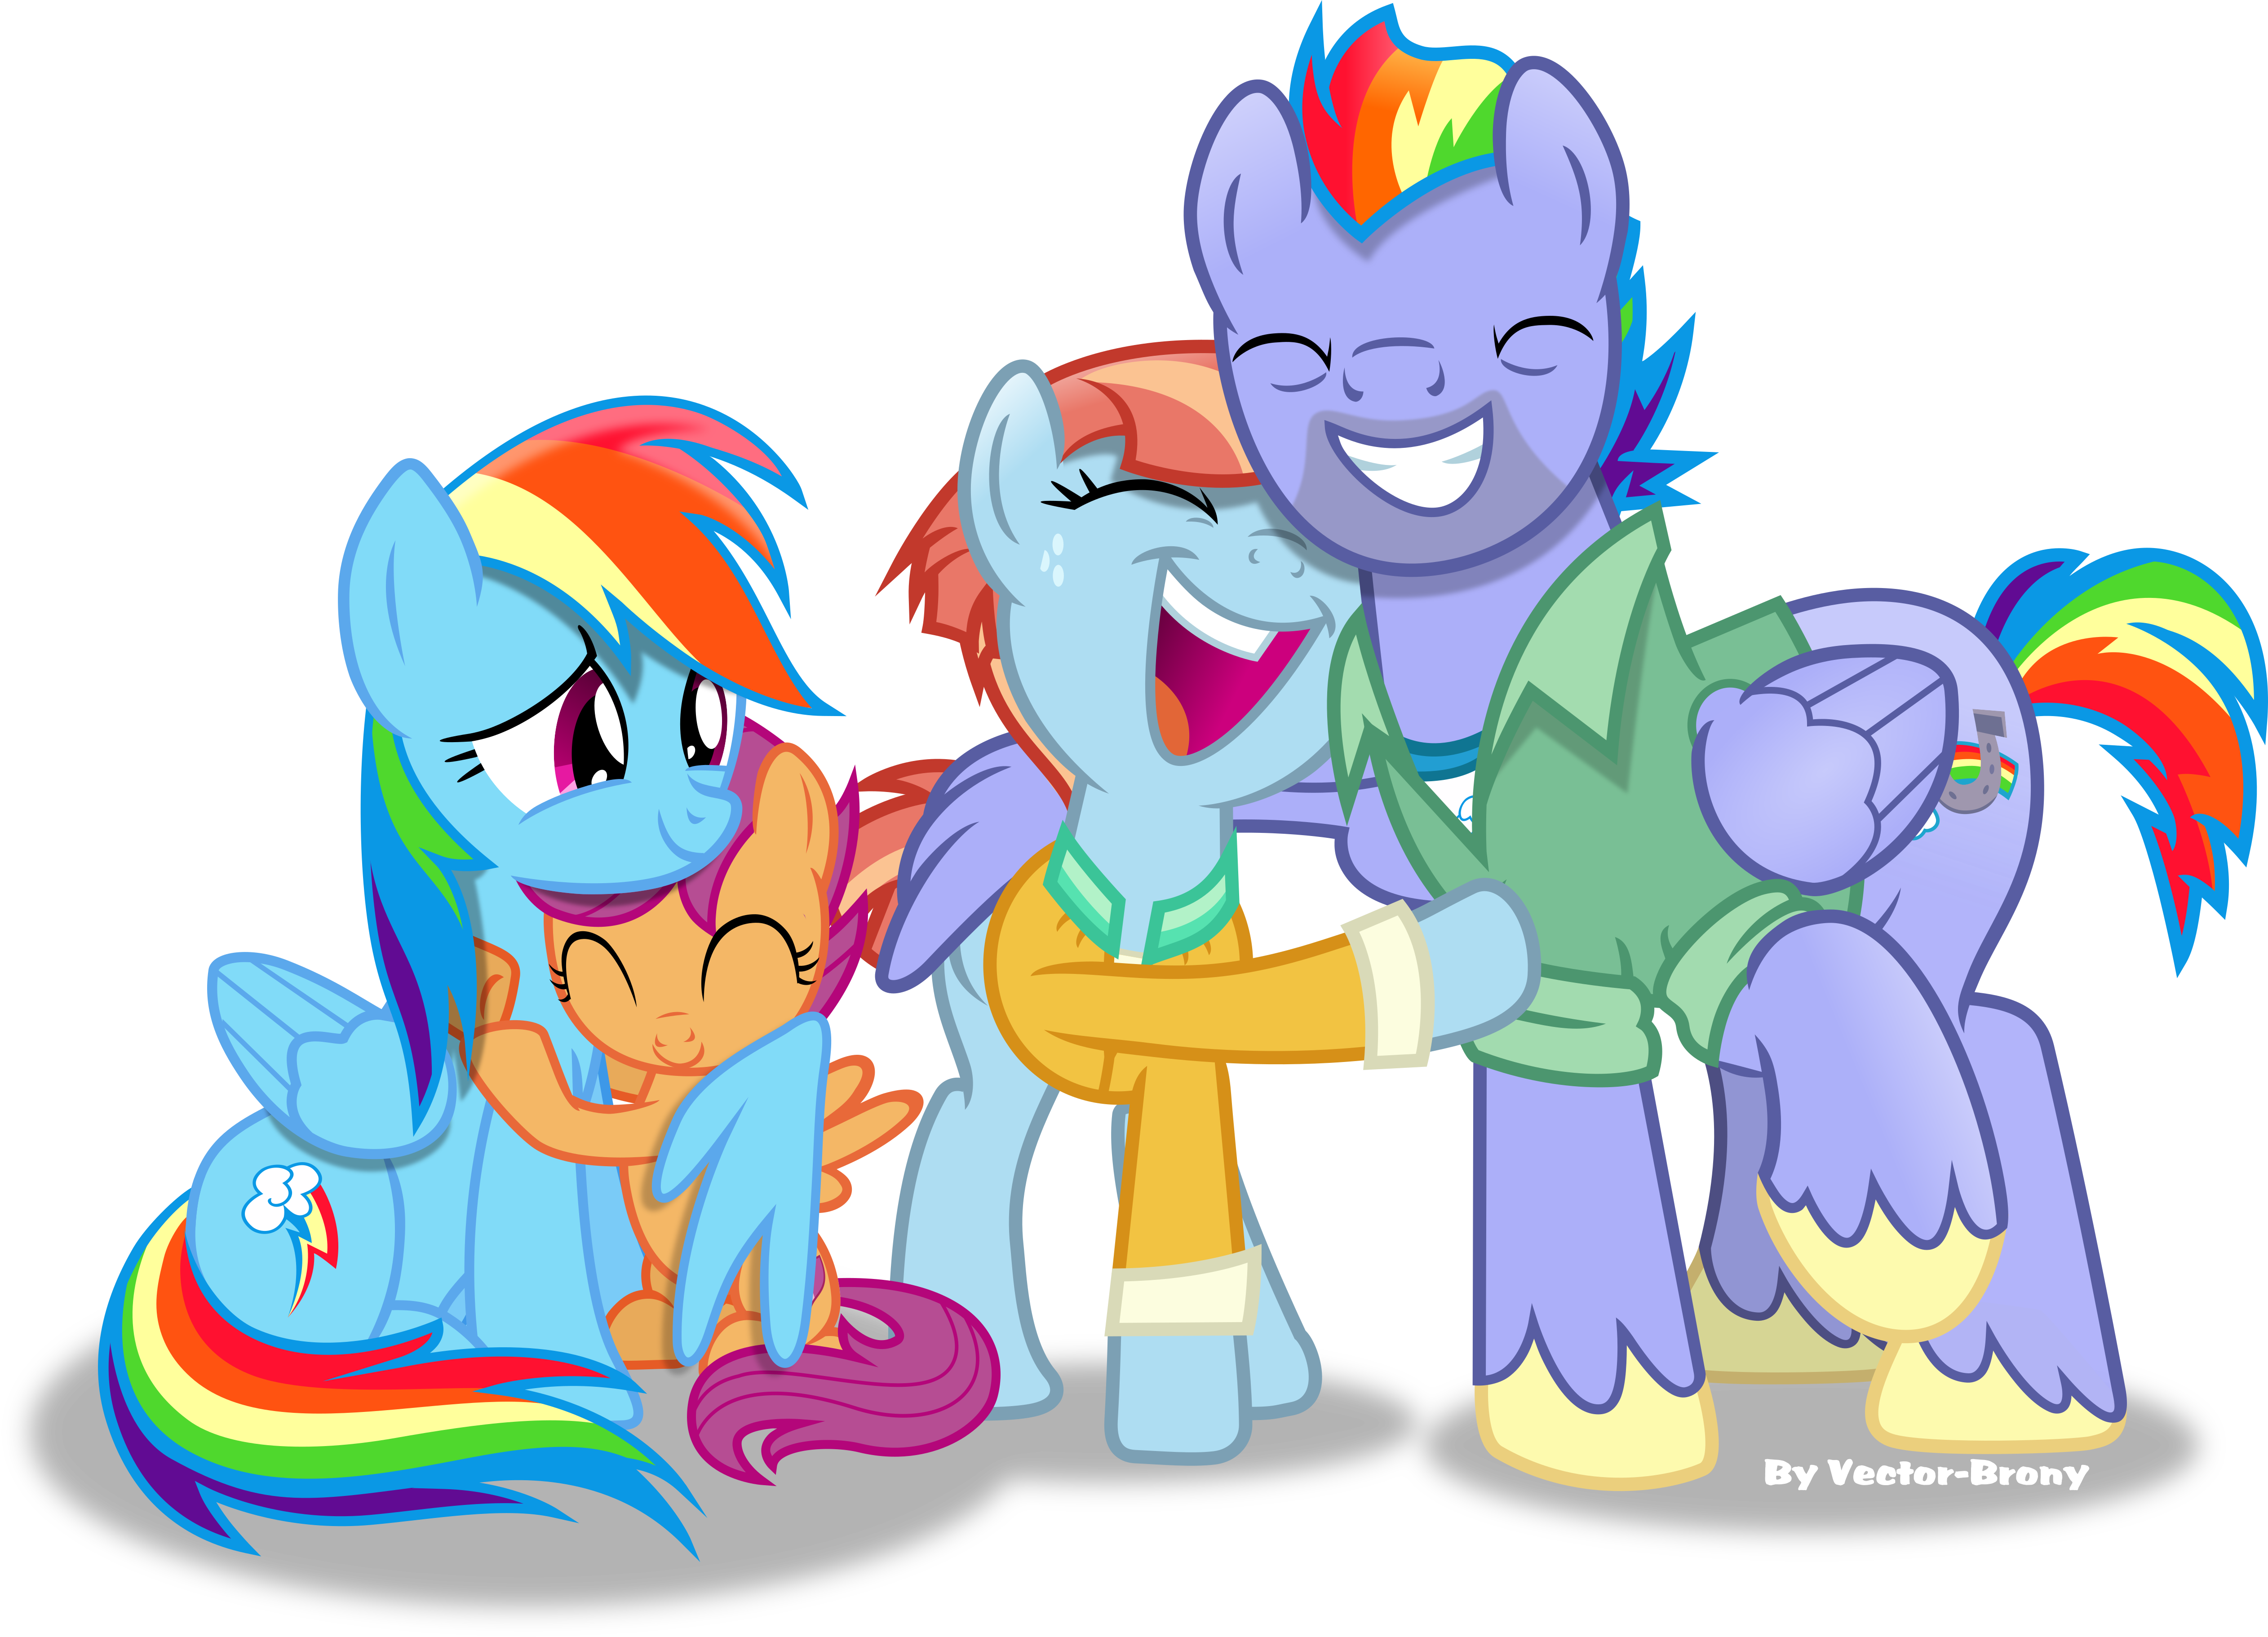 Dashie's Family By Vector-brony - Pony Little My Butter Pear (5048x3644)